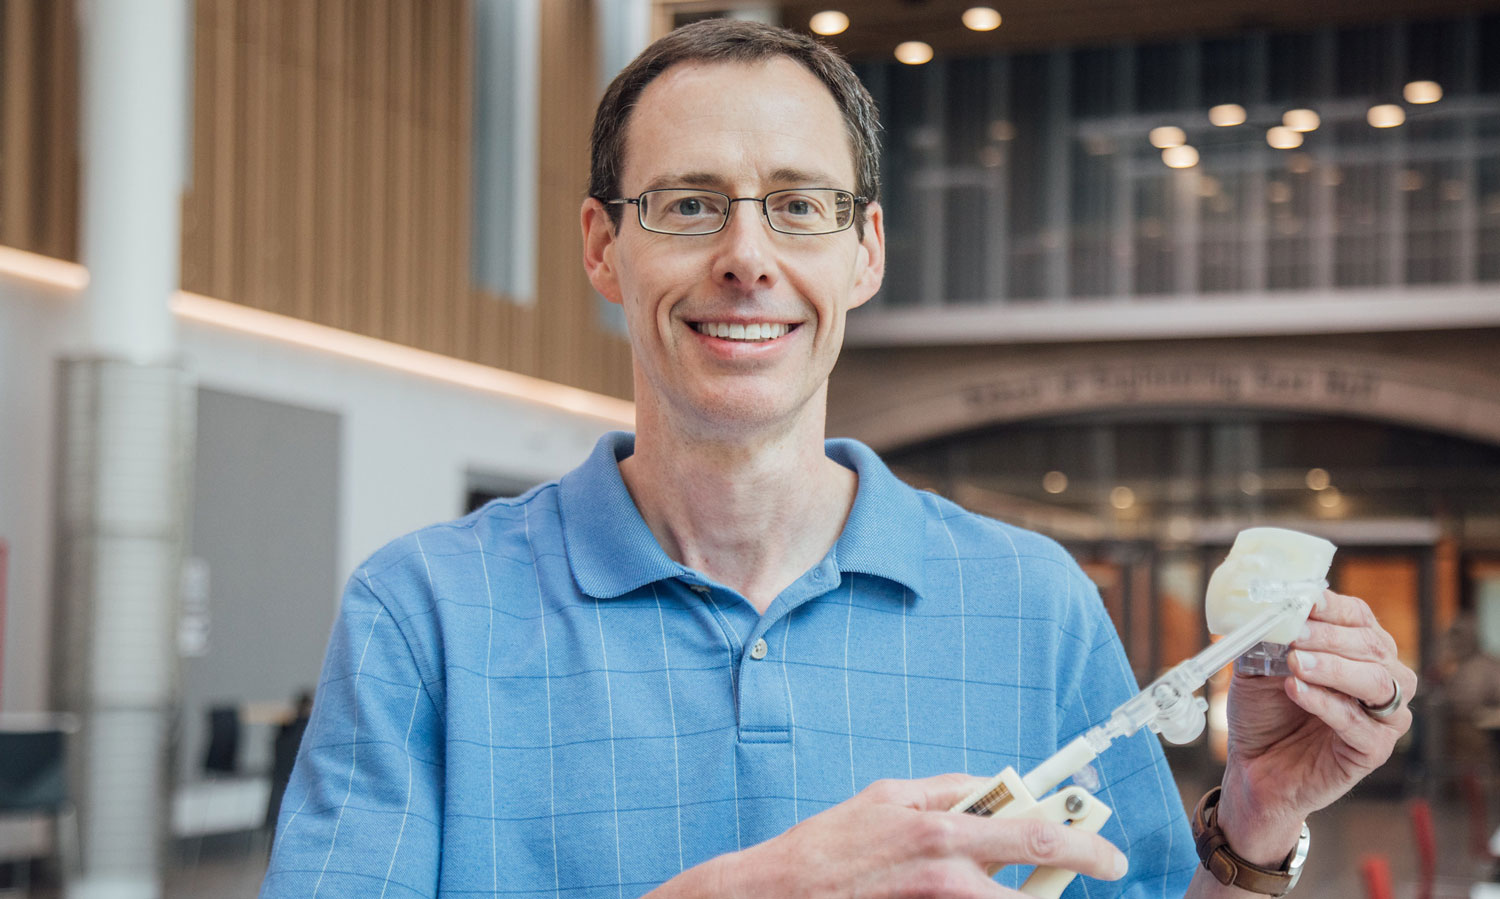 Worth Longest, Ph.D., mechanical and nuclear engineering professor, is part of a team of researchers creating a surfactant that can be aerosolized and a device to deliver it to infants with respiratory distress syndrome living in low-resource populations